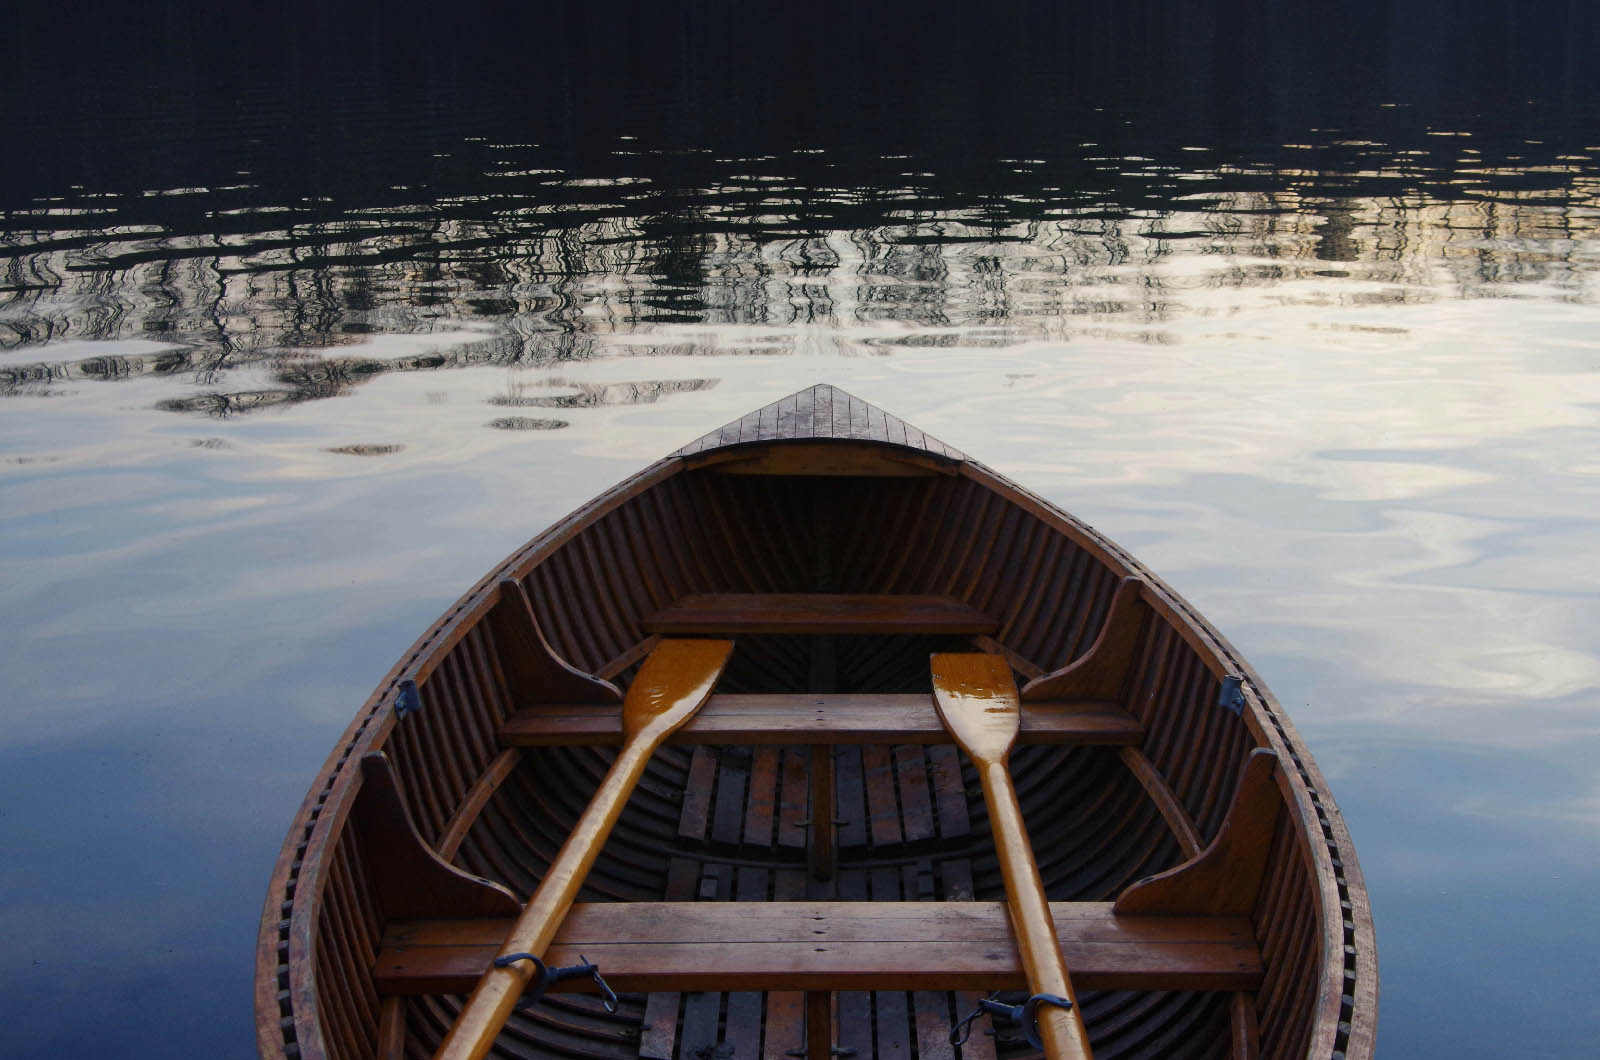 Wooden rowboat with oars